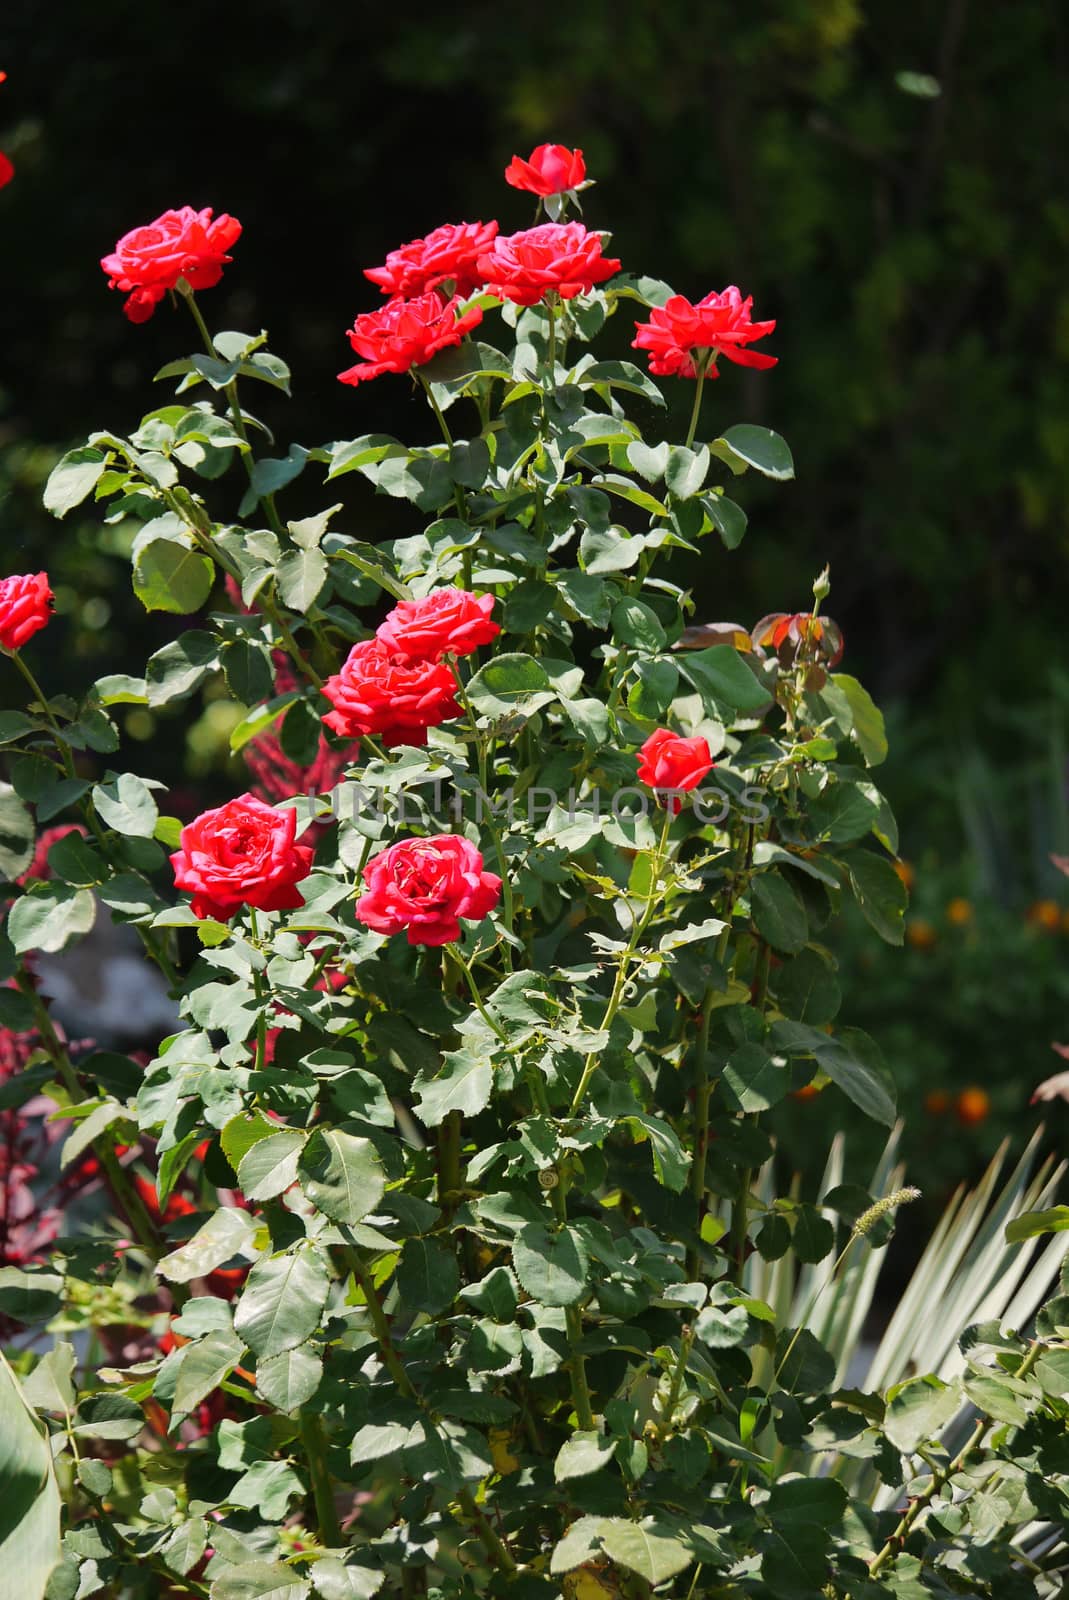 A lush bush of red roses with a lot of green leaves on tall thin stems growing in the garden. by Adamchuk